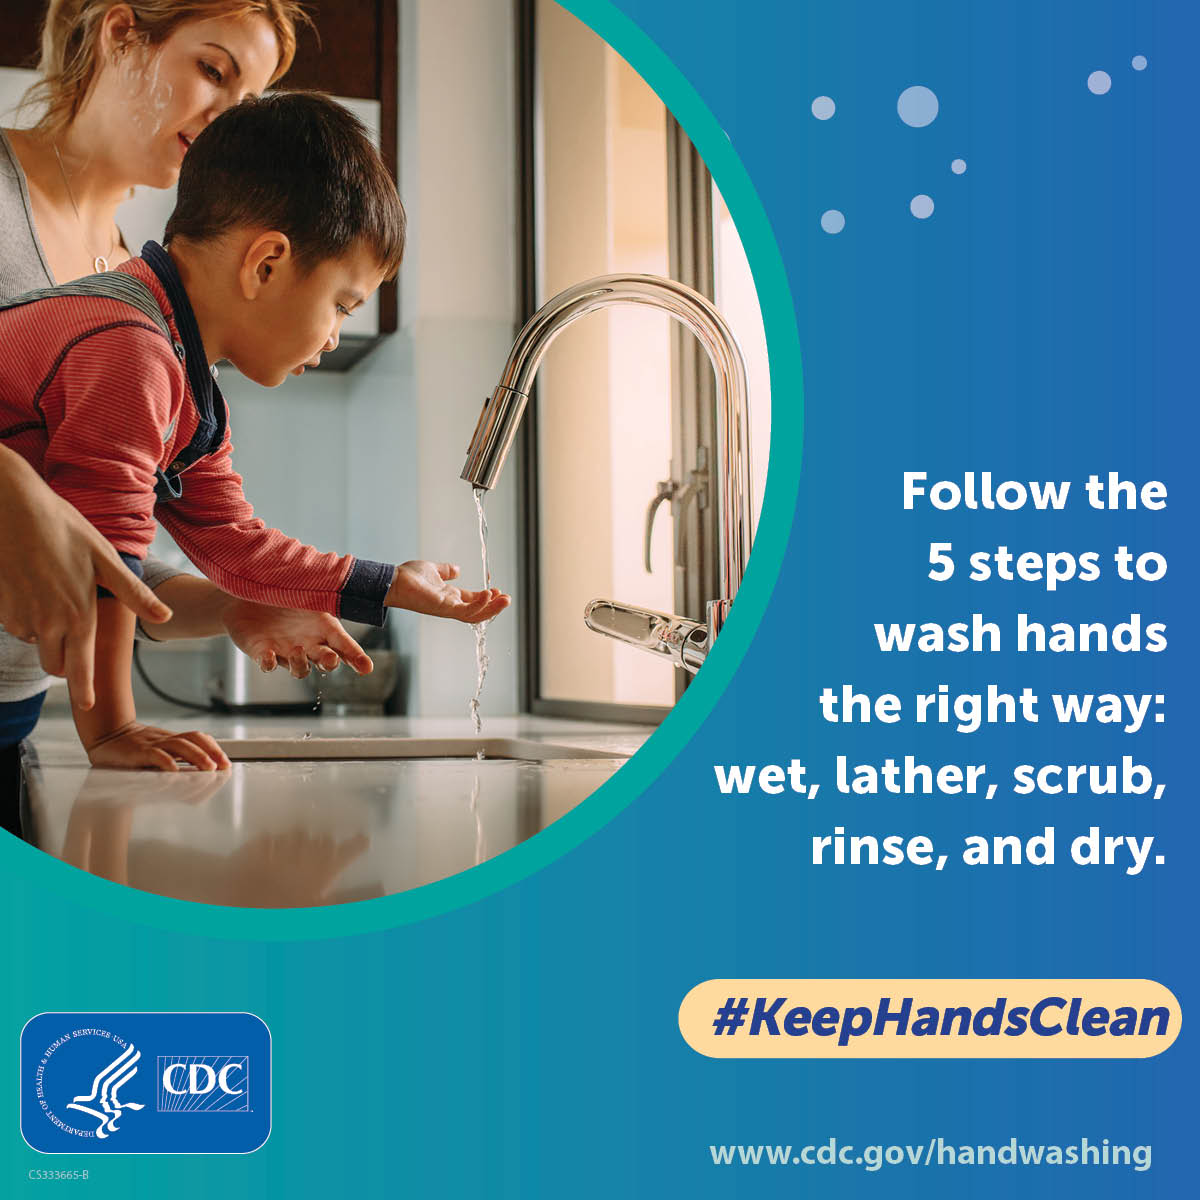 Follow the 5 steps to wash hands the right way: wet, lather, scrub, rinse, and dry.